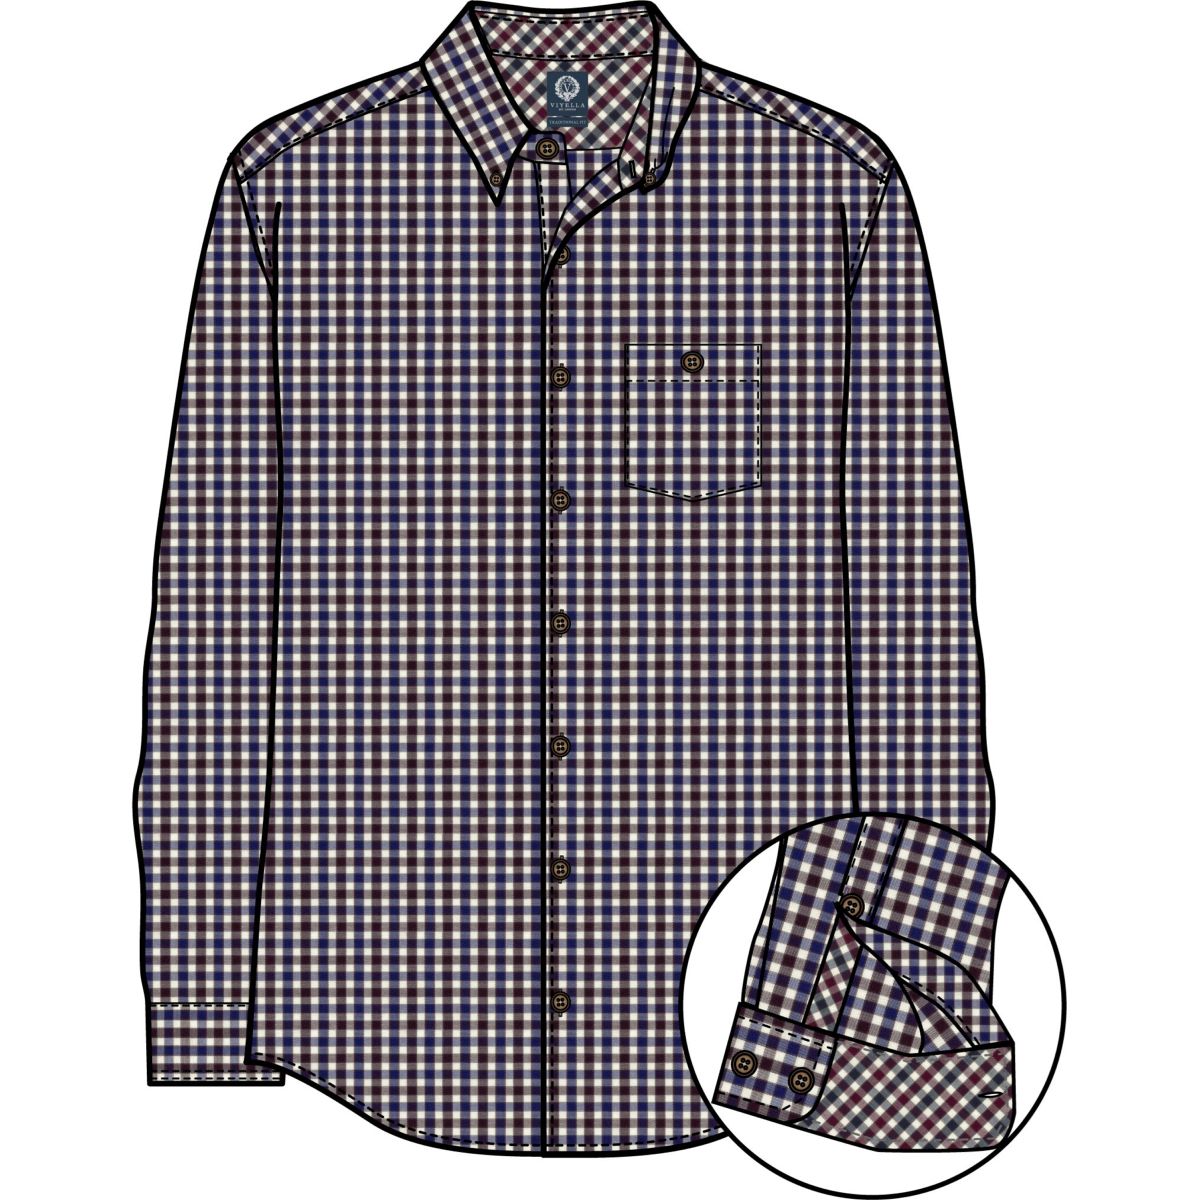 Burgundy, Navy, and Cream Check Cotton Wrinkle-Free Button-Down Shirt by Viyella